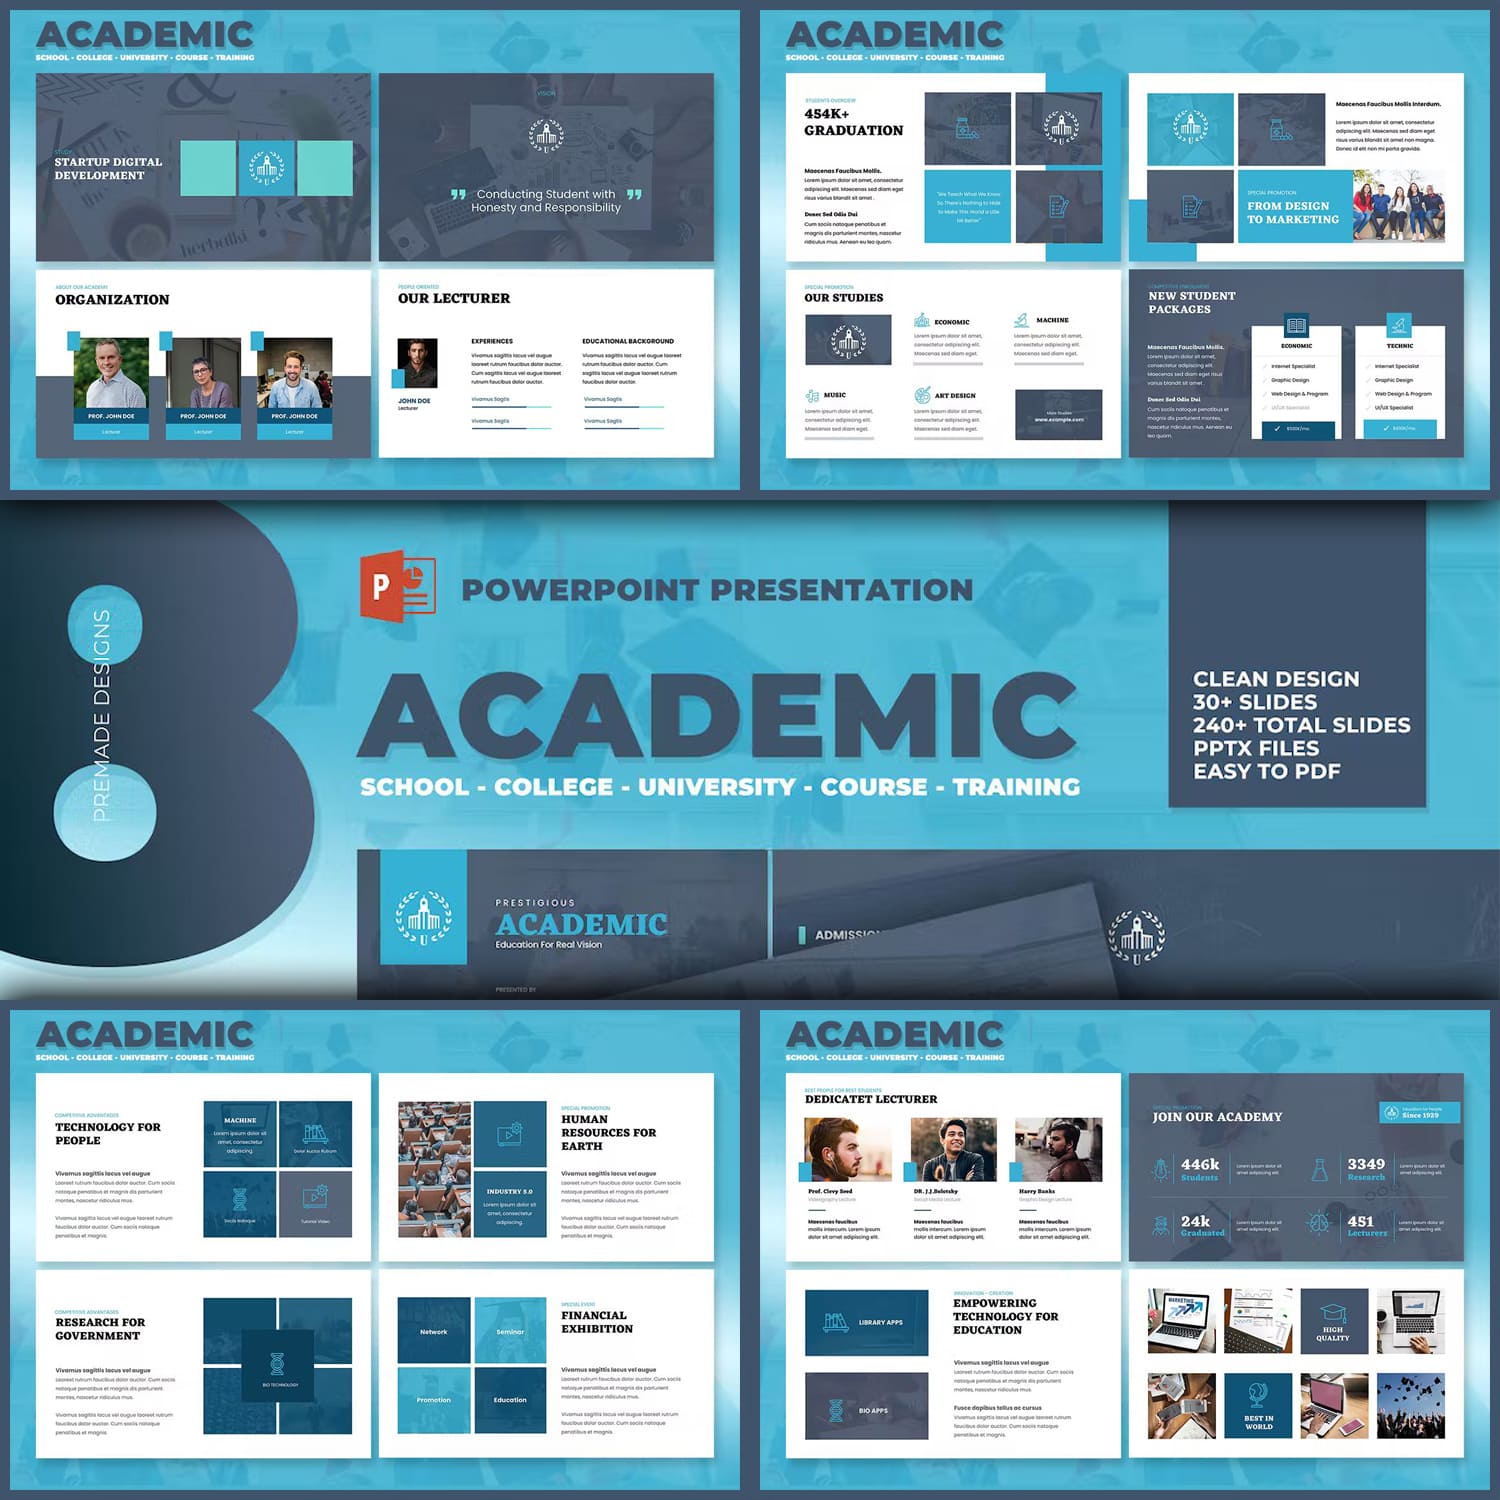 240+ total slides of Academic Powerpoint Presentation.